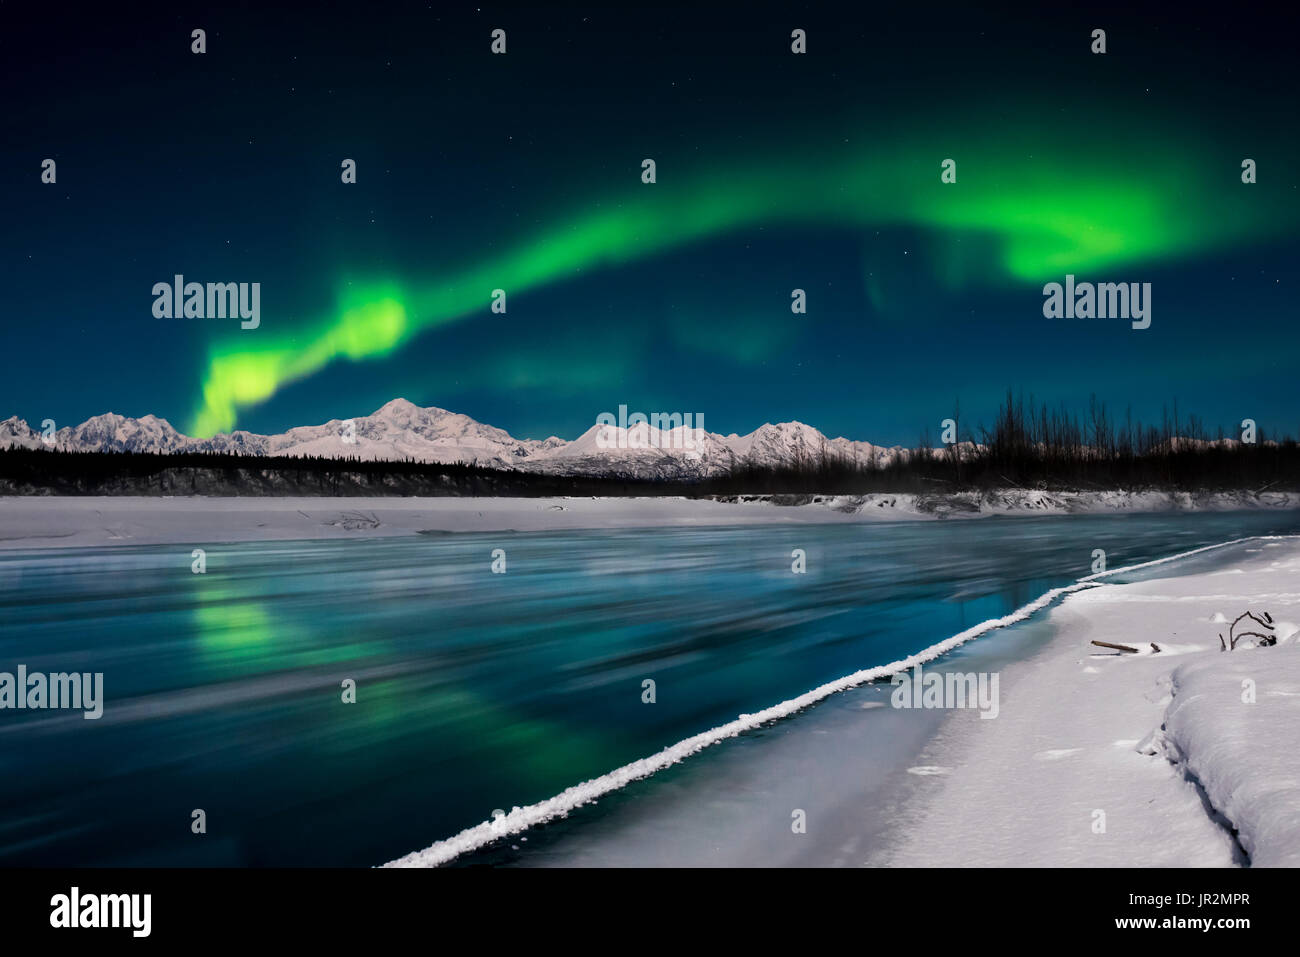 Green Aurora Borealis Arch Over The Chulitna River With Denali And The Alaska Range In The Background, Denali State Park, Southcentral Alaska, USA Stock Photo